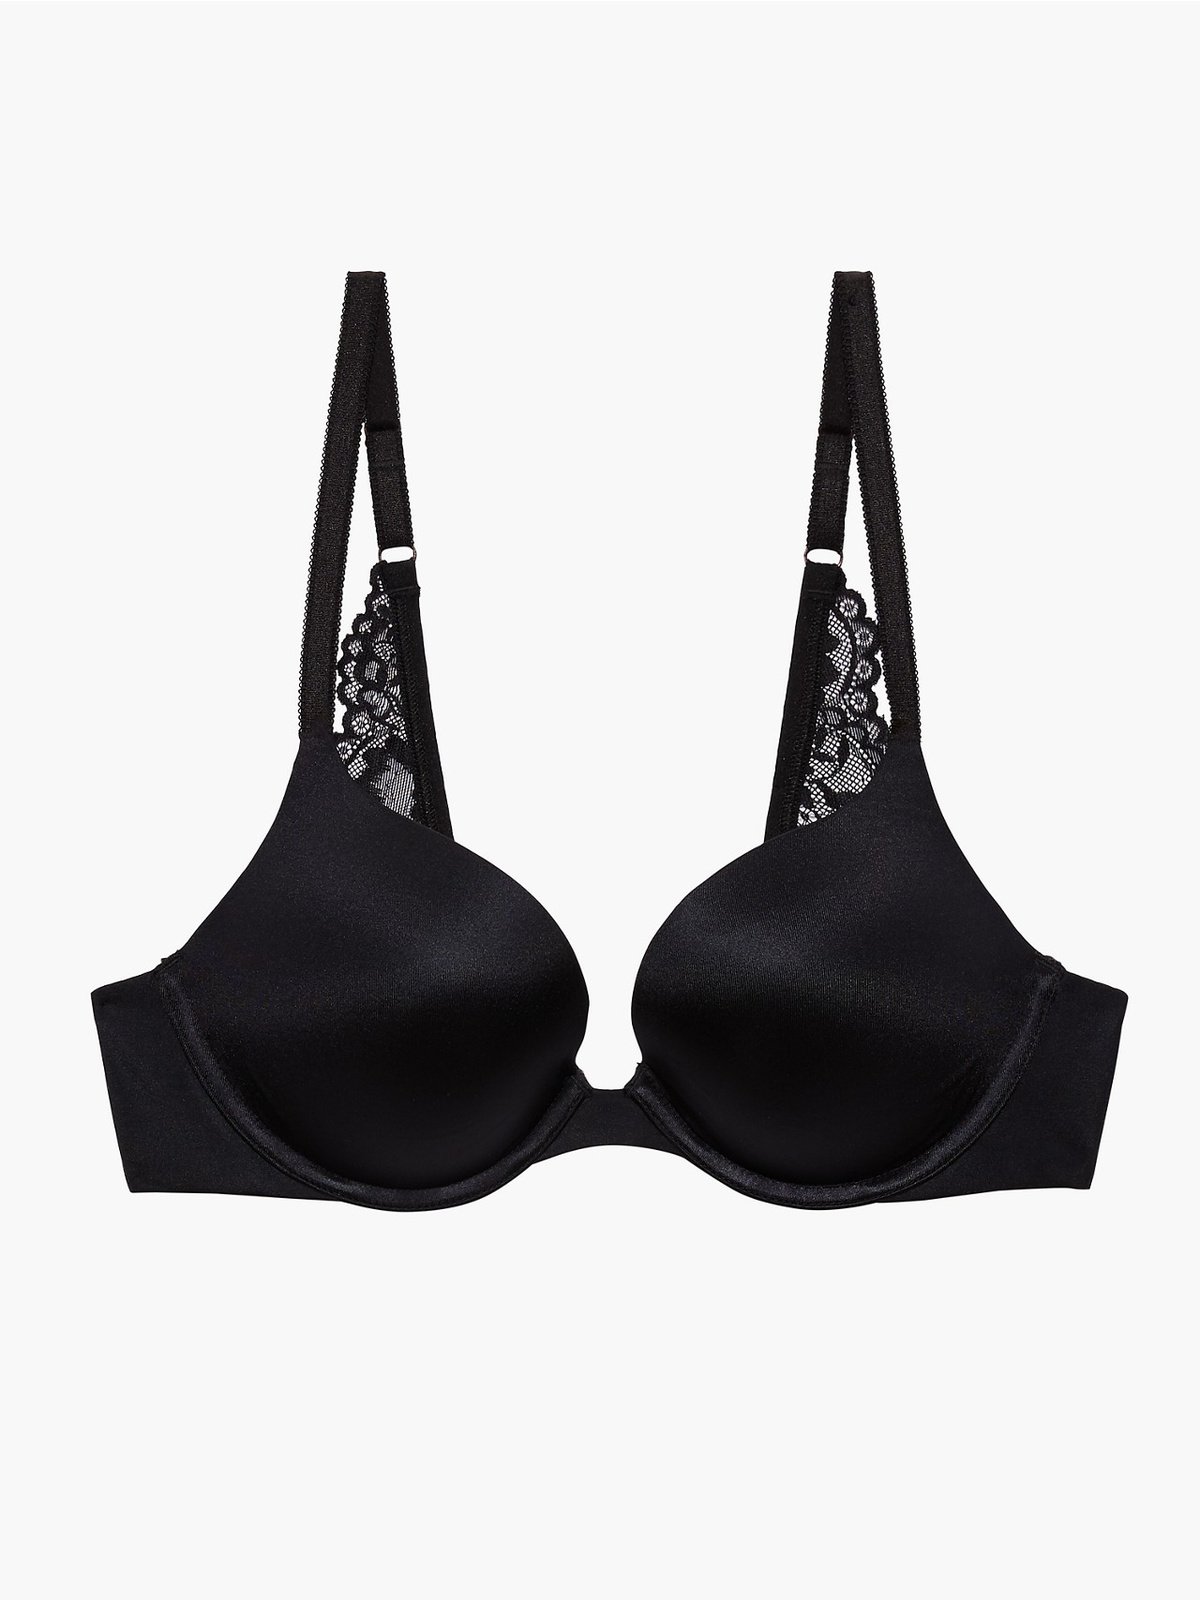 Floral Lace Push Up Bra in Black